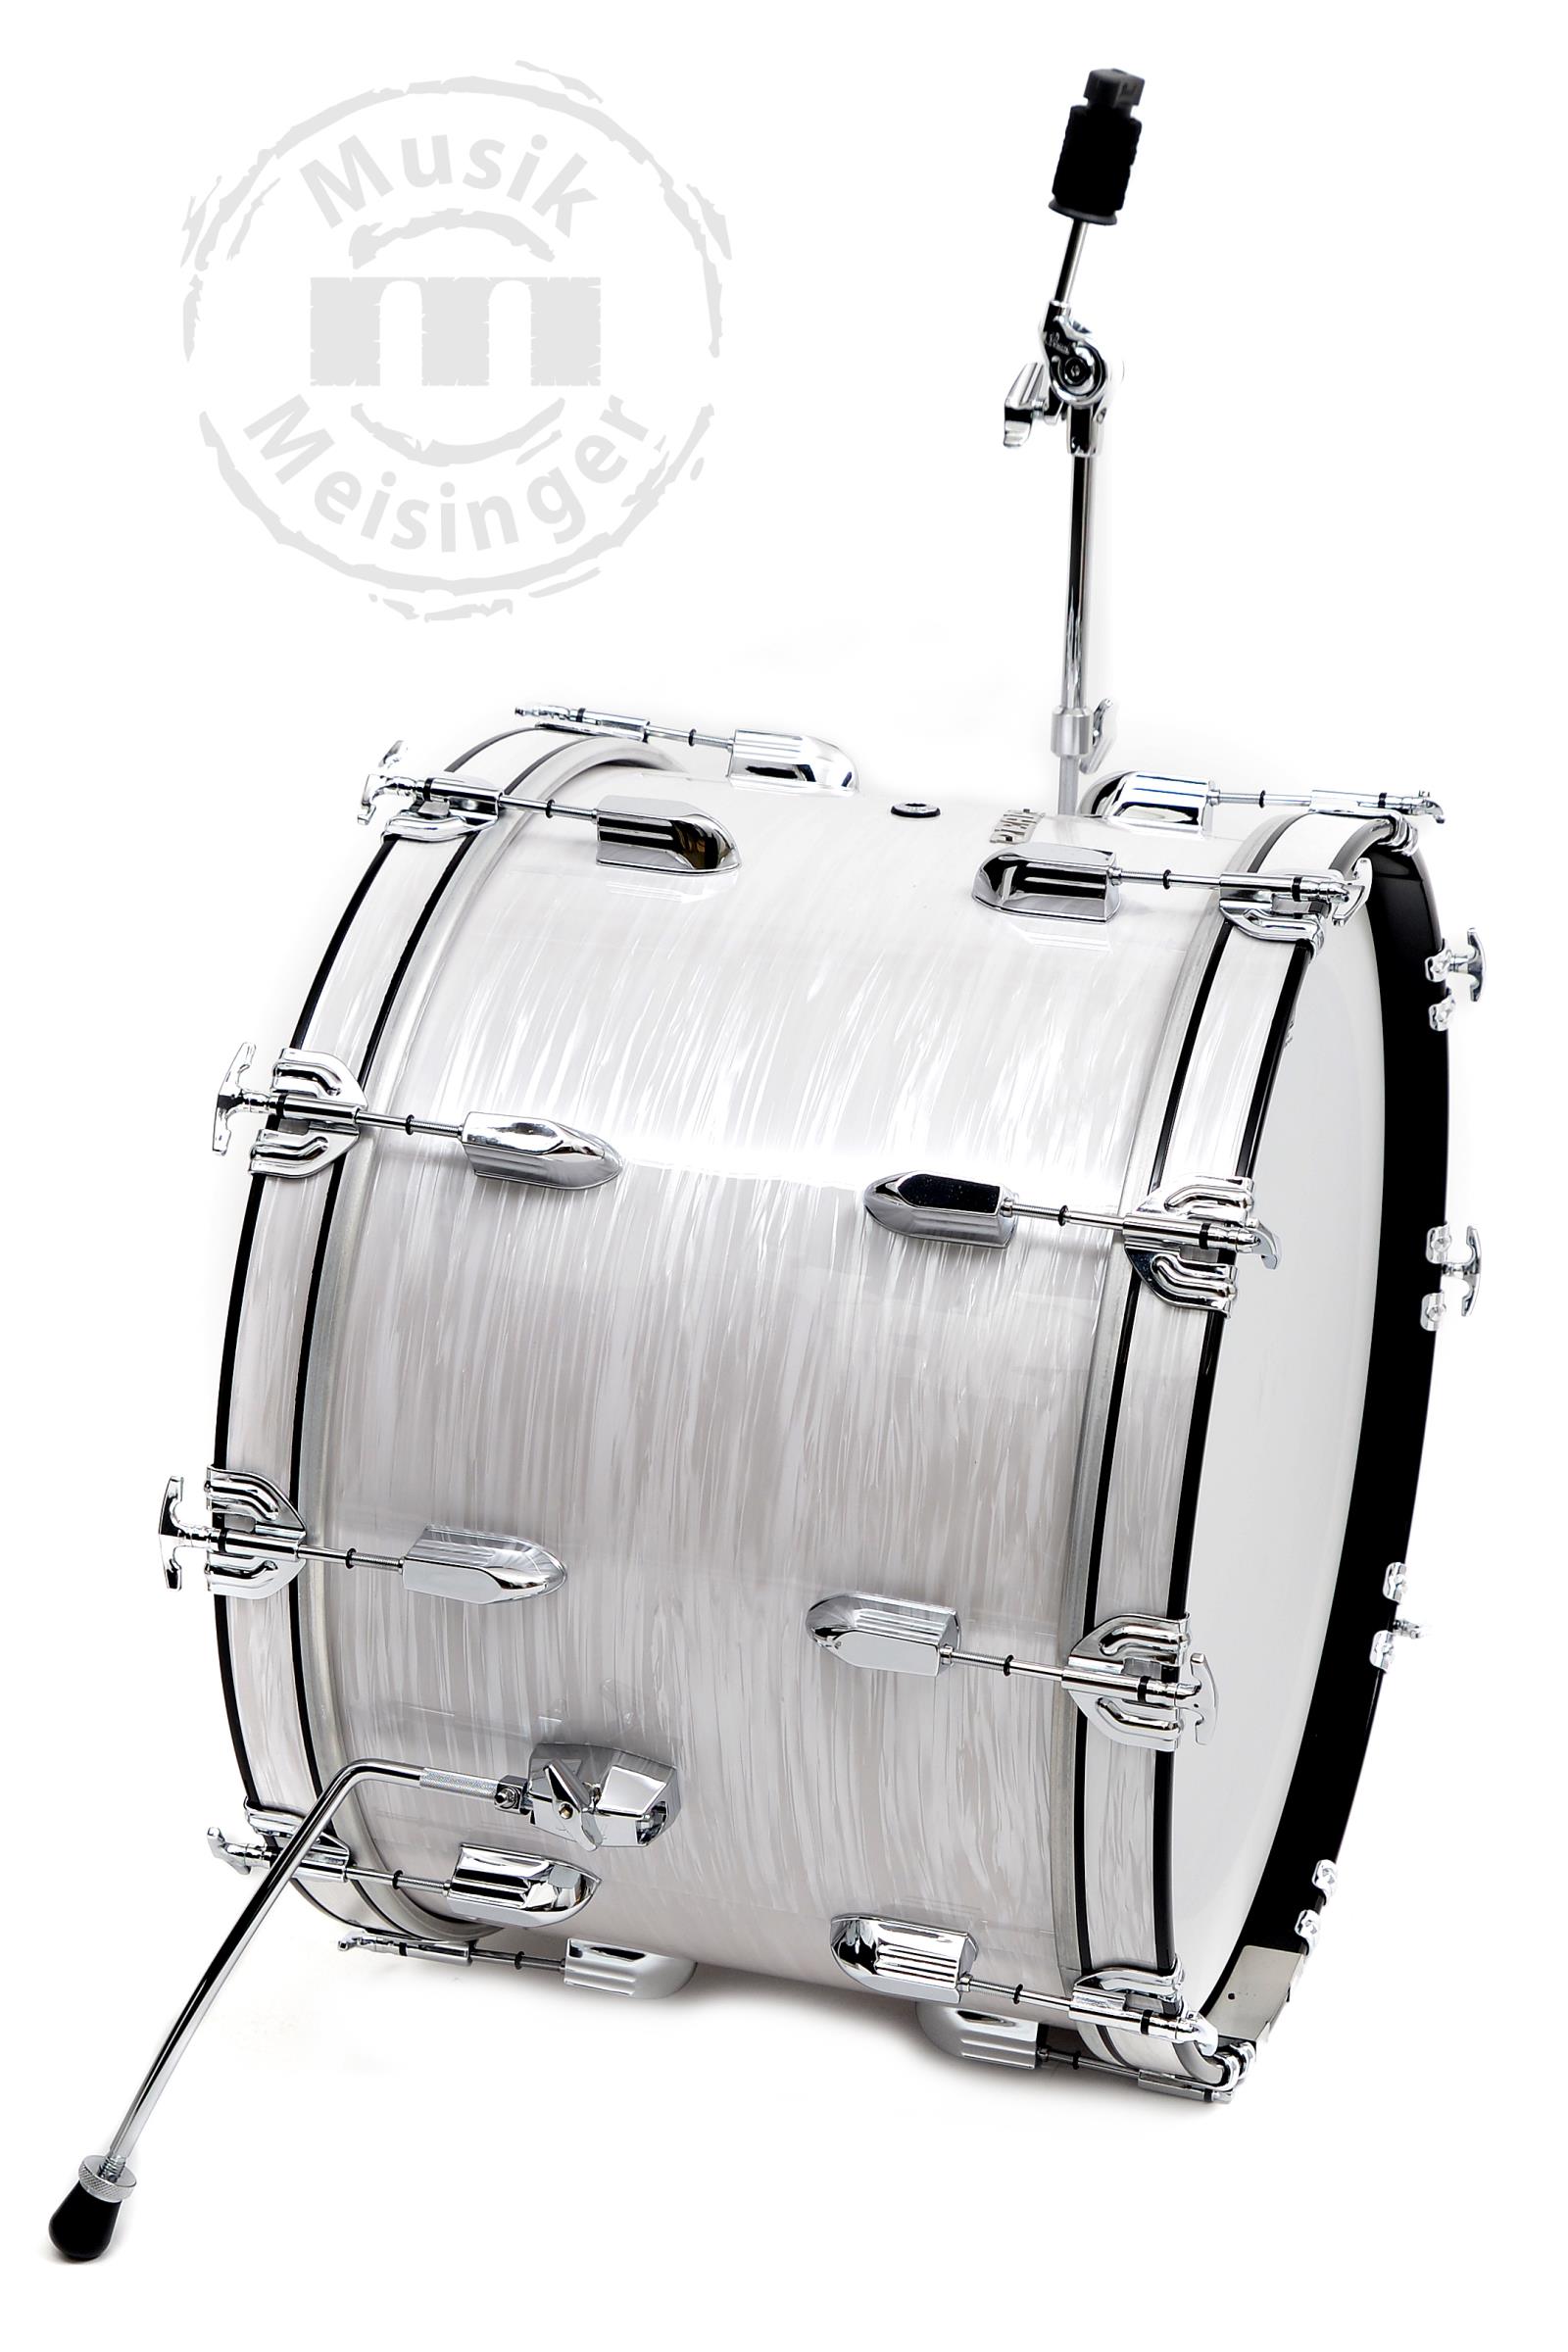 Pearl President Phenolic 22B/13T/16FT/14S Pearl White Oyster